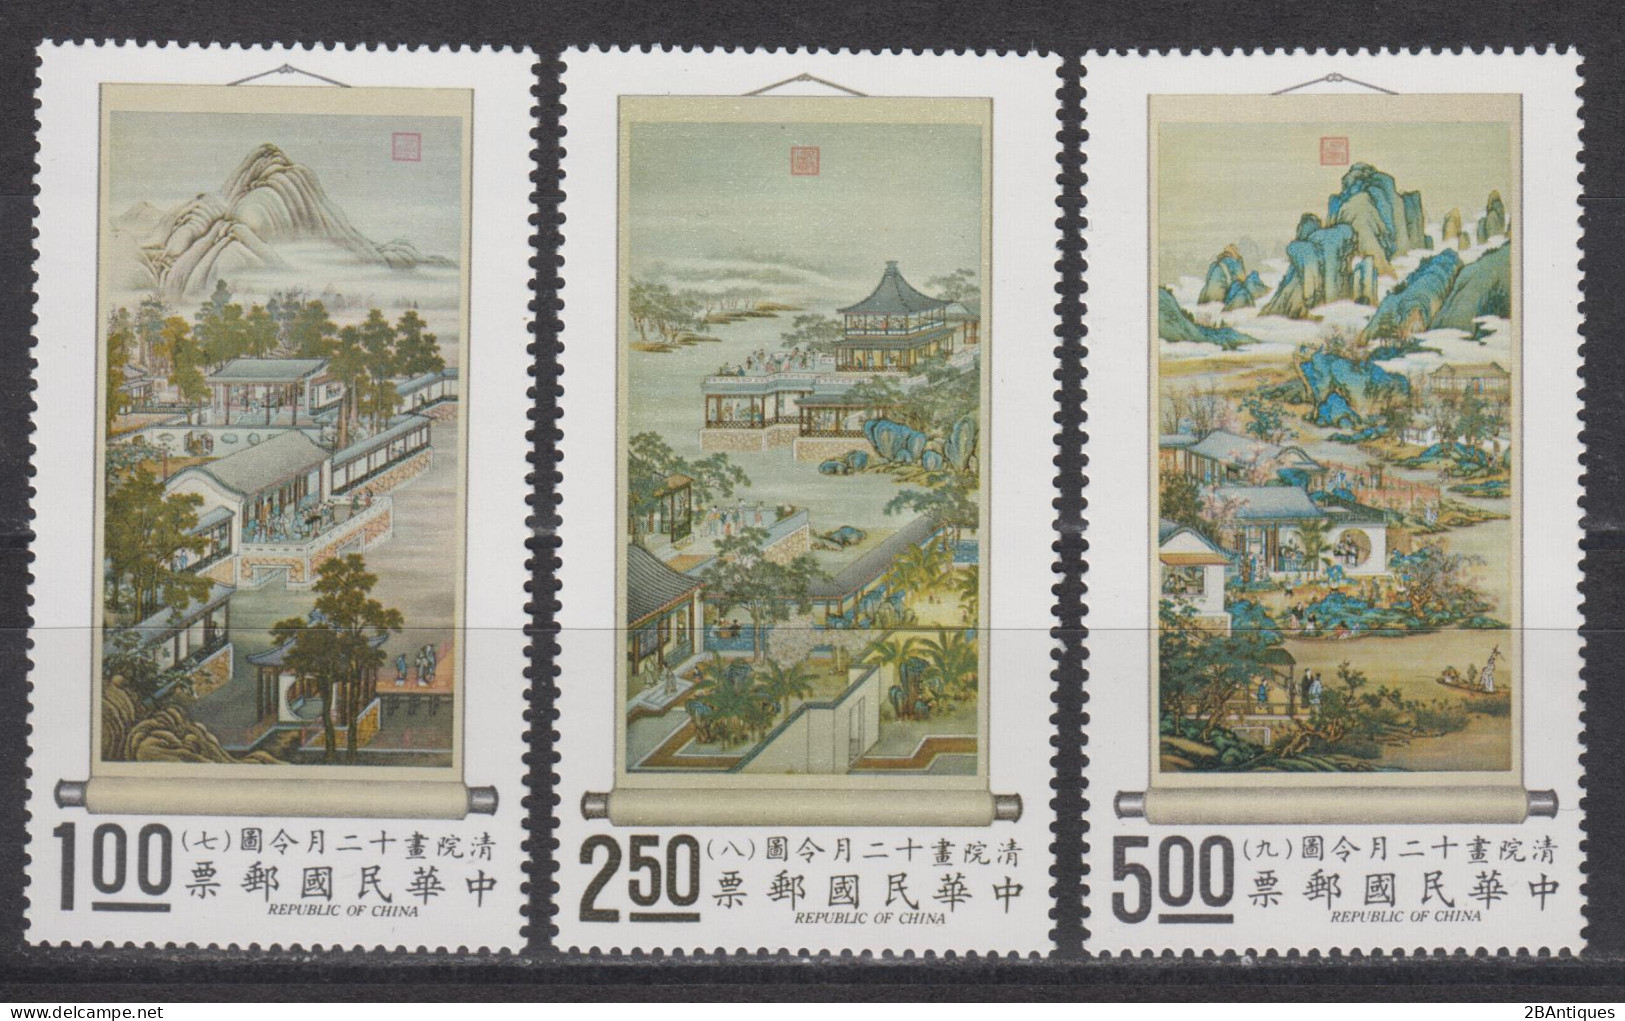 TAIWAN 1971 - "Occupations Of The Twelve Months" Hanging Scrolls - "Autumn" MNH** OG XF - Neufs